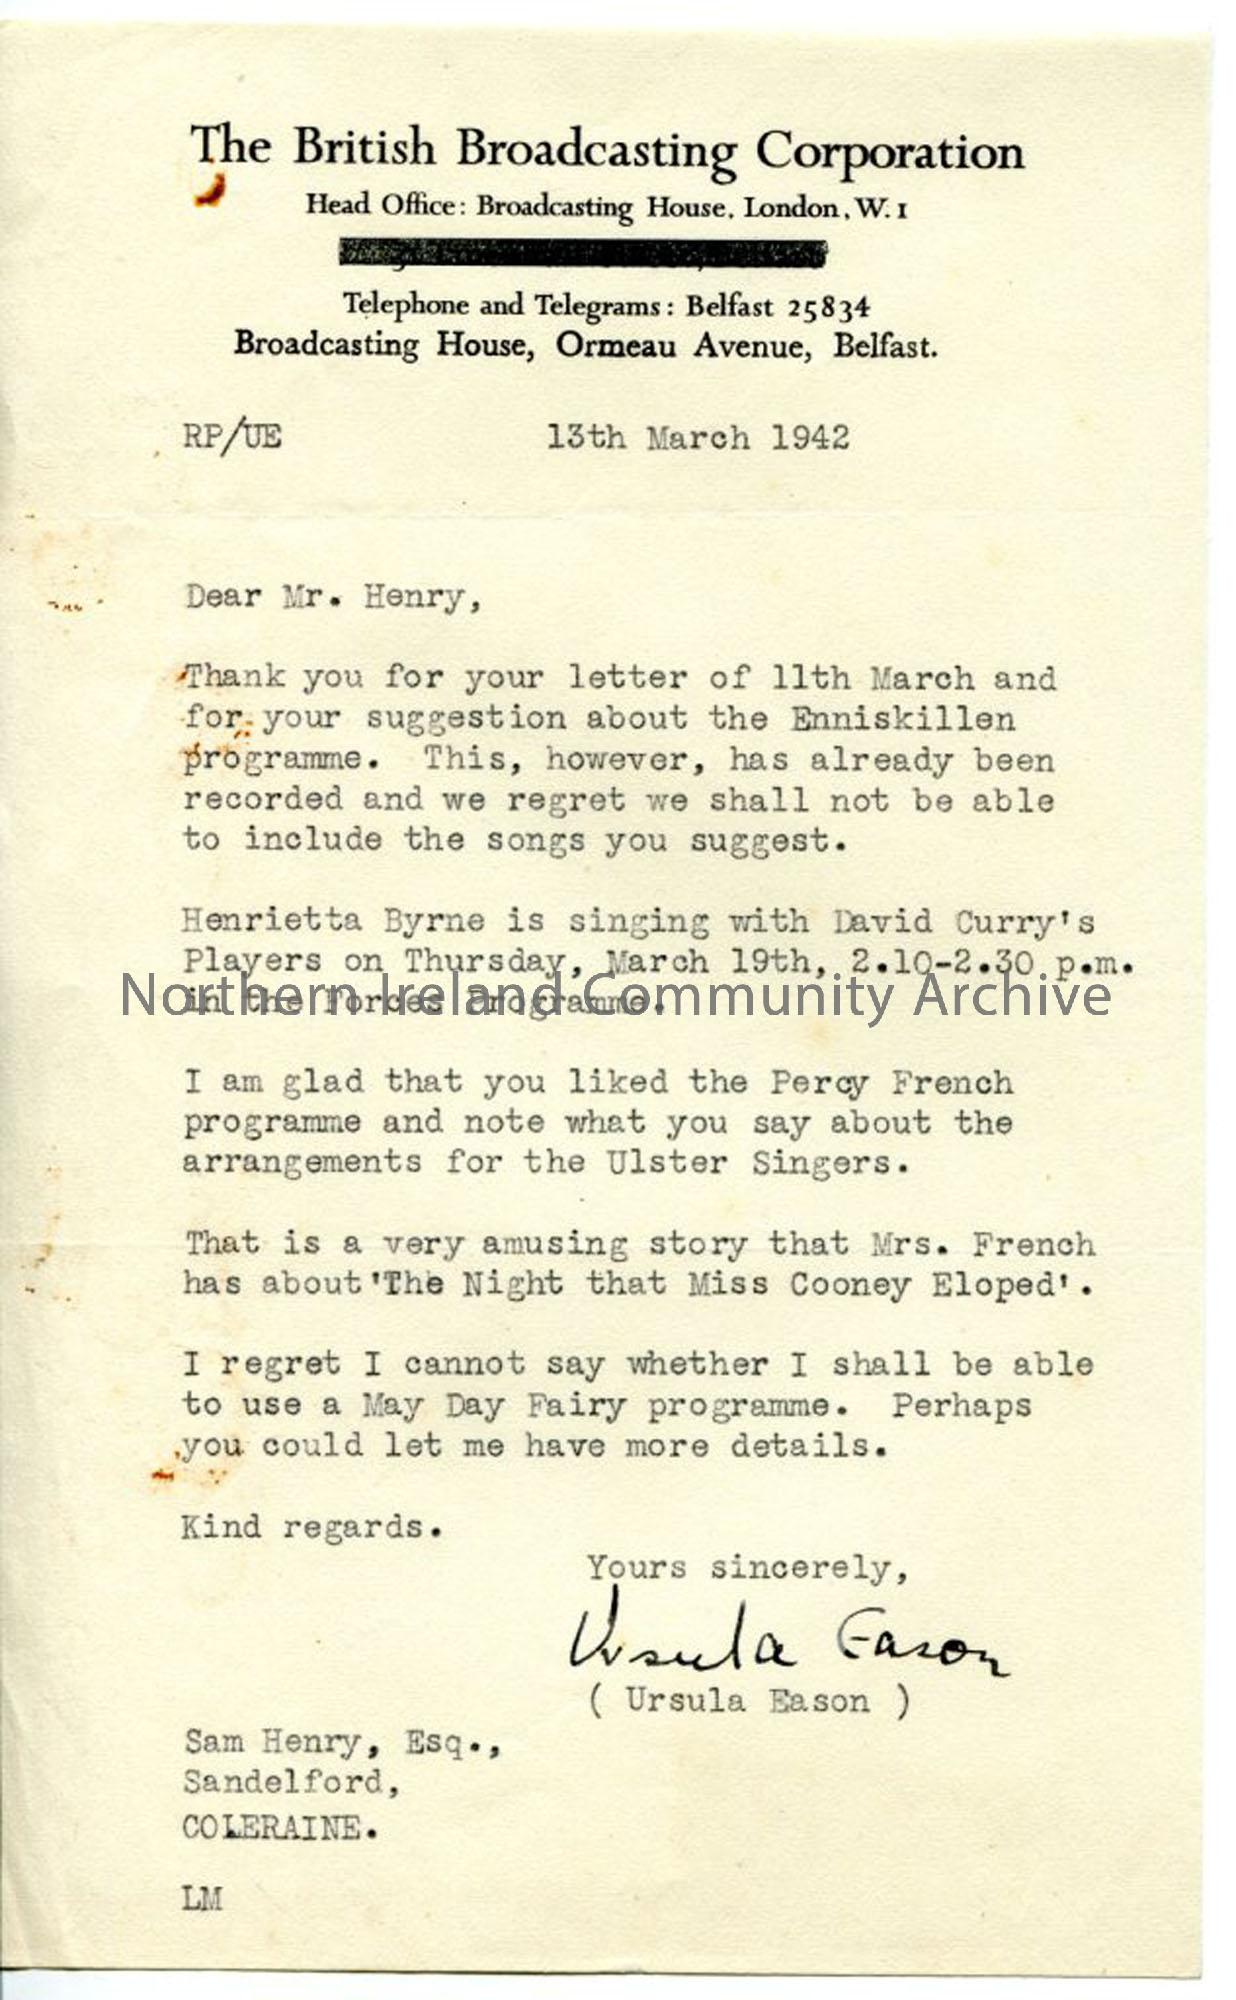 Letter from Ursula Eason, dated 13.3.1942